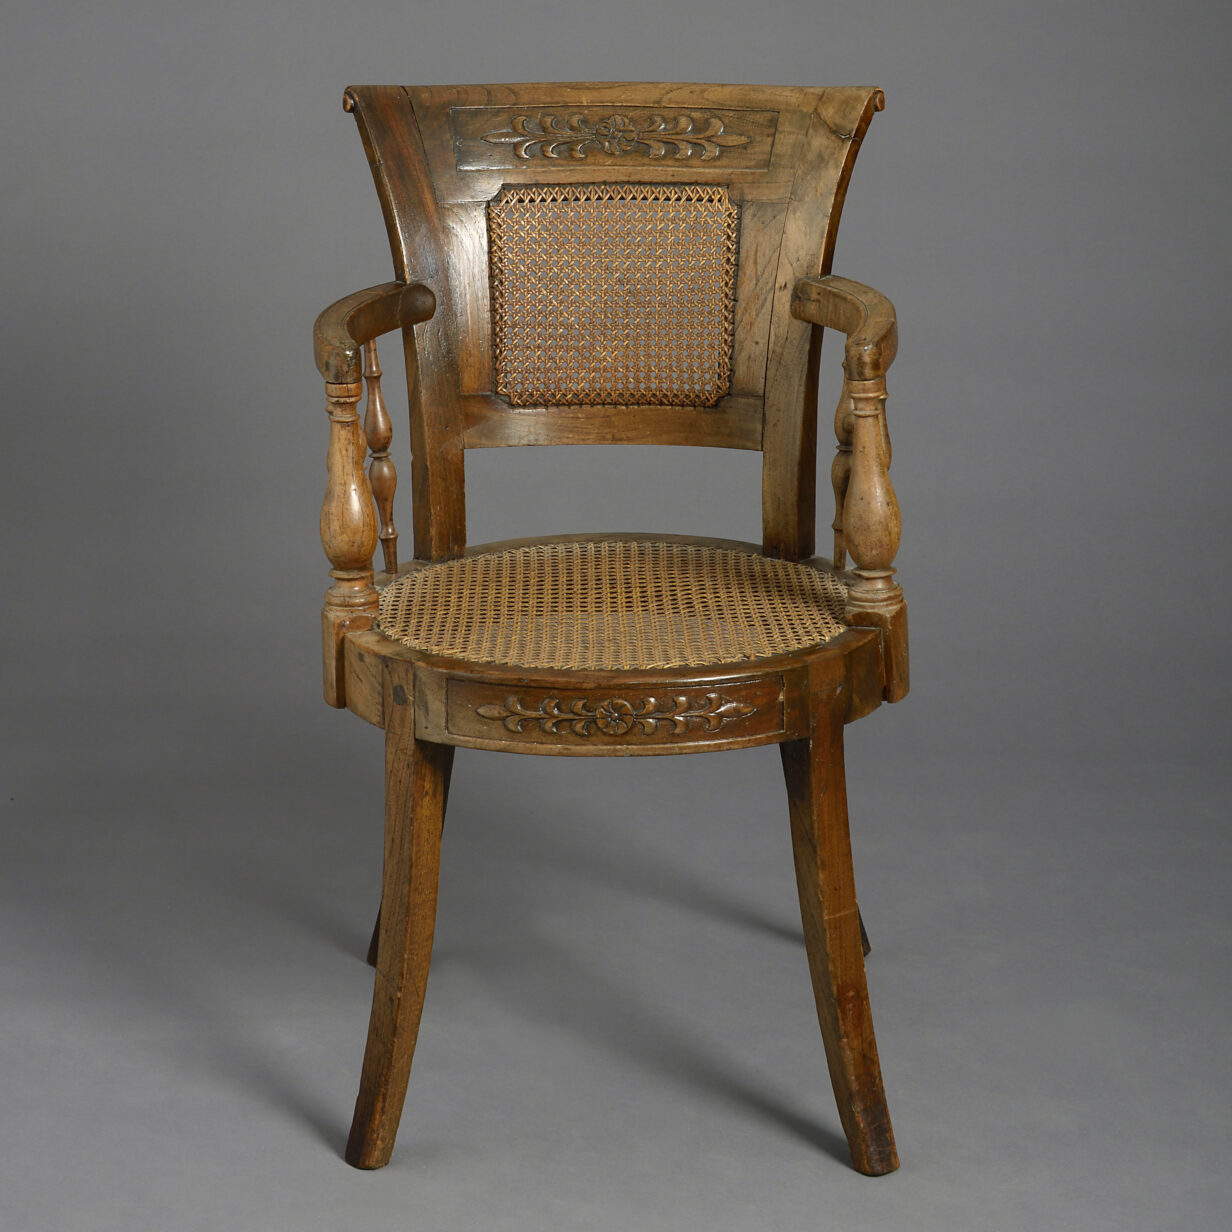 Early 19th century empire period open armchair